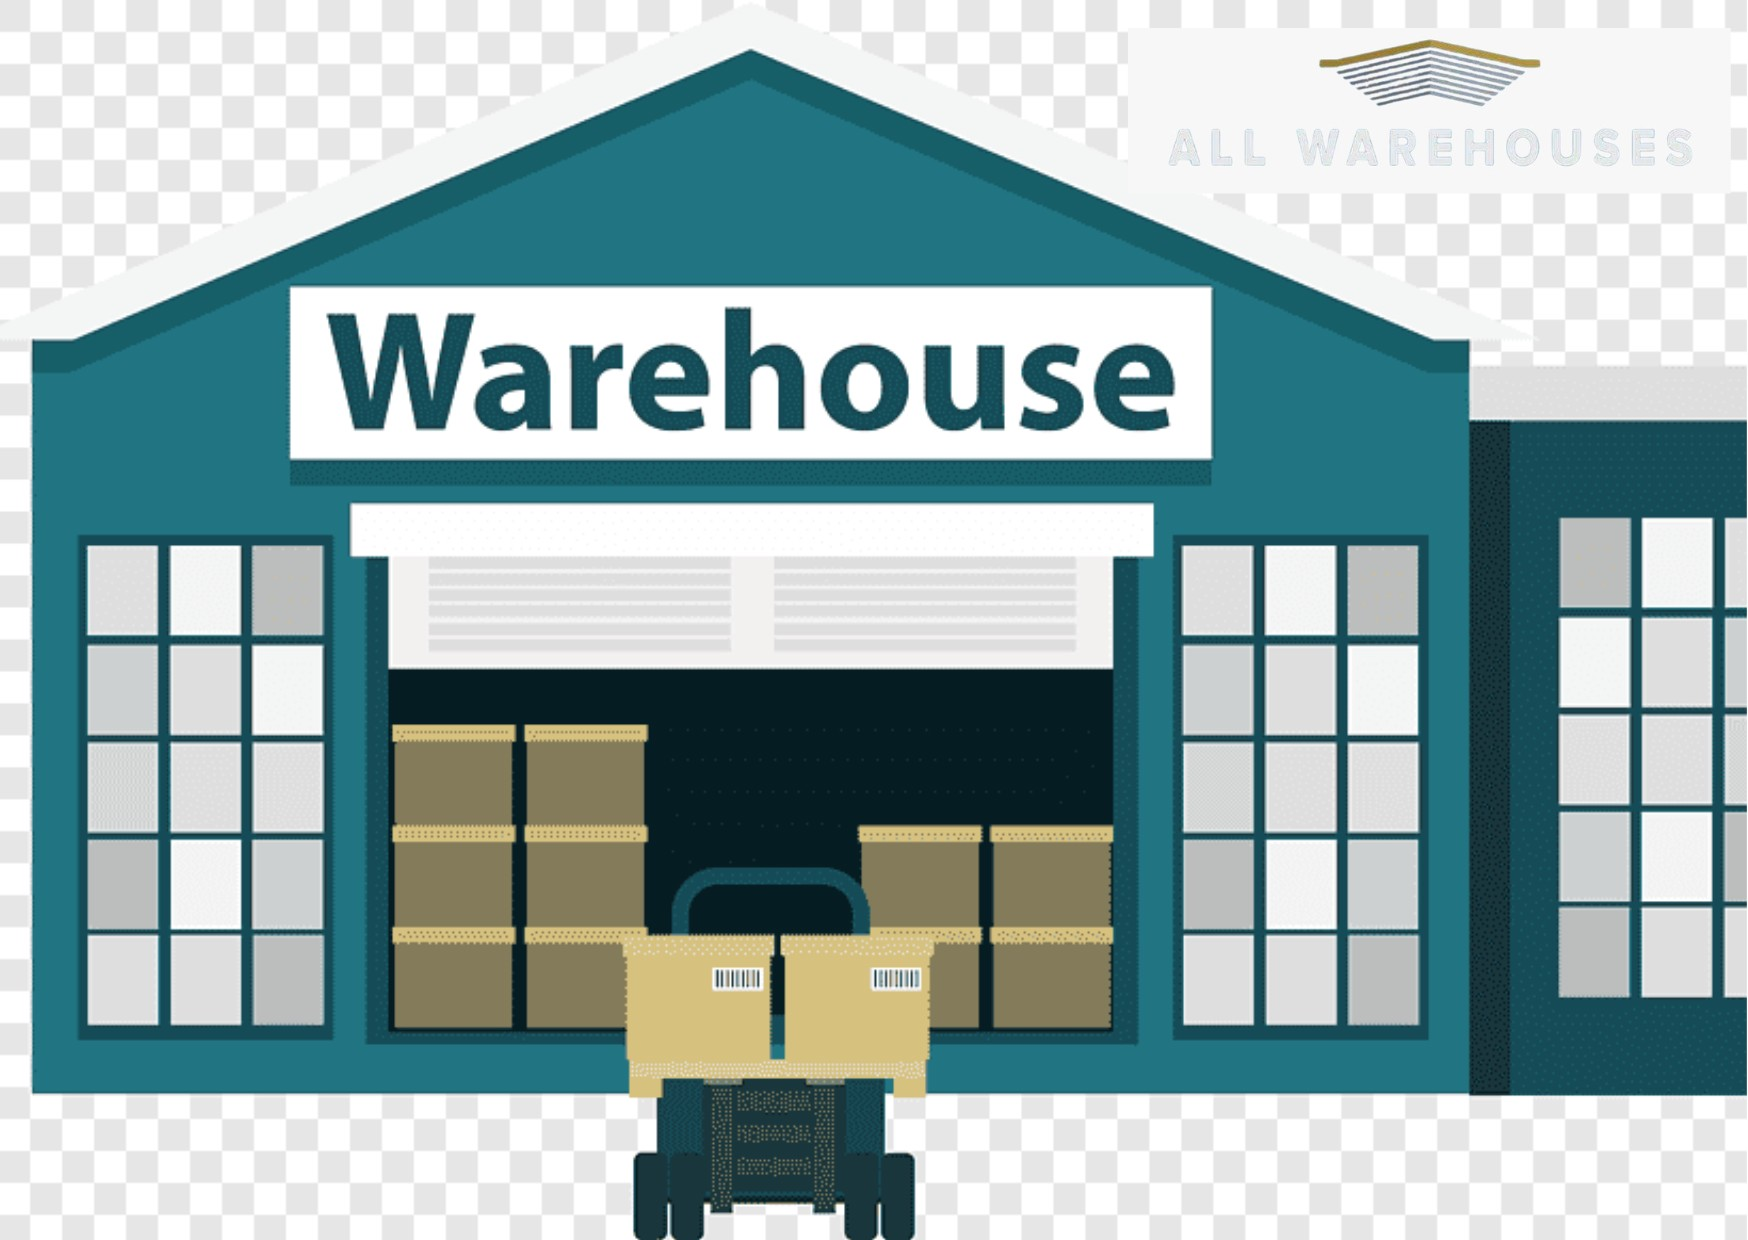 WAREHOUSE OR GODOWN WHICH ONE IS CORRECT TERM ?